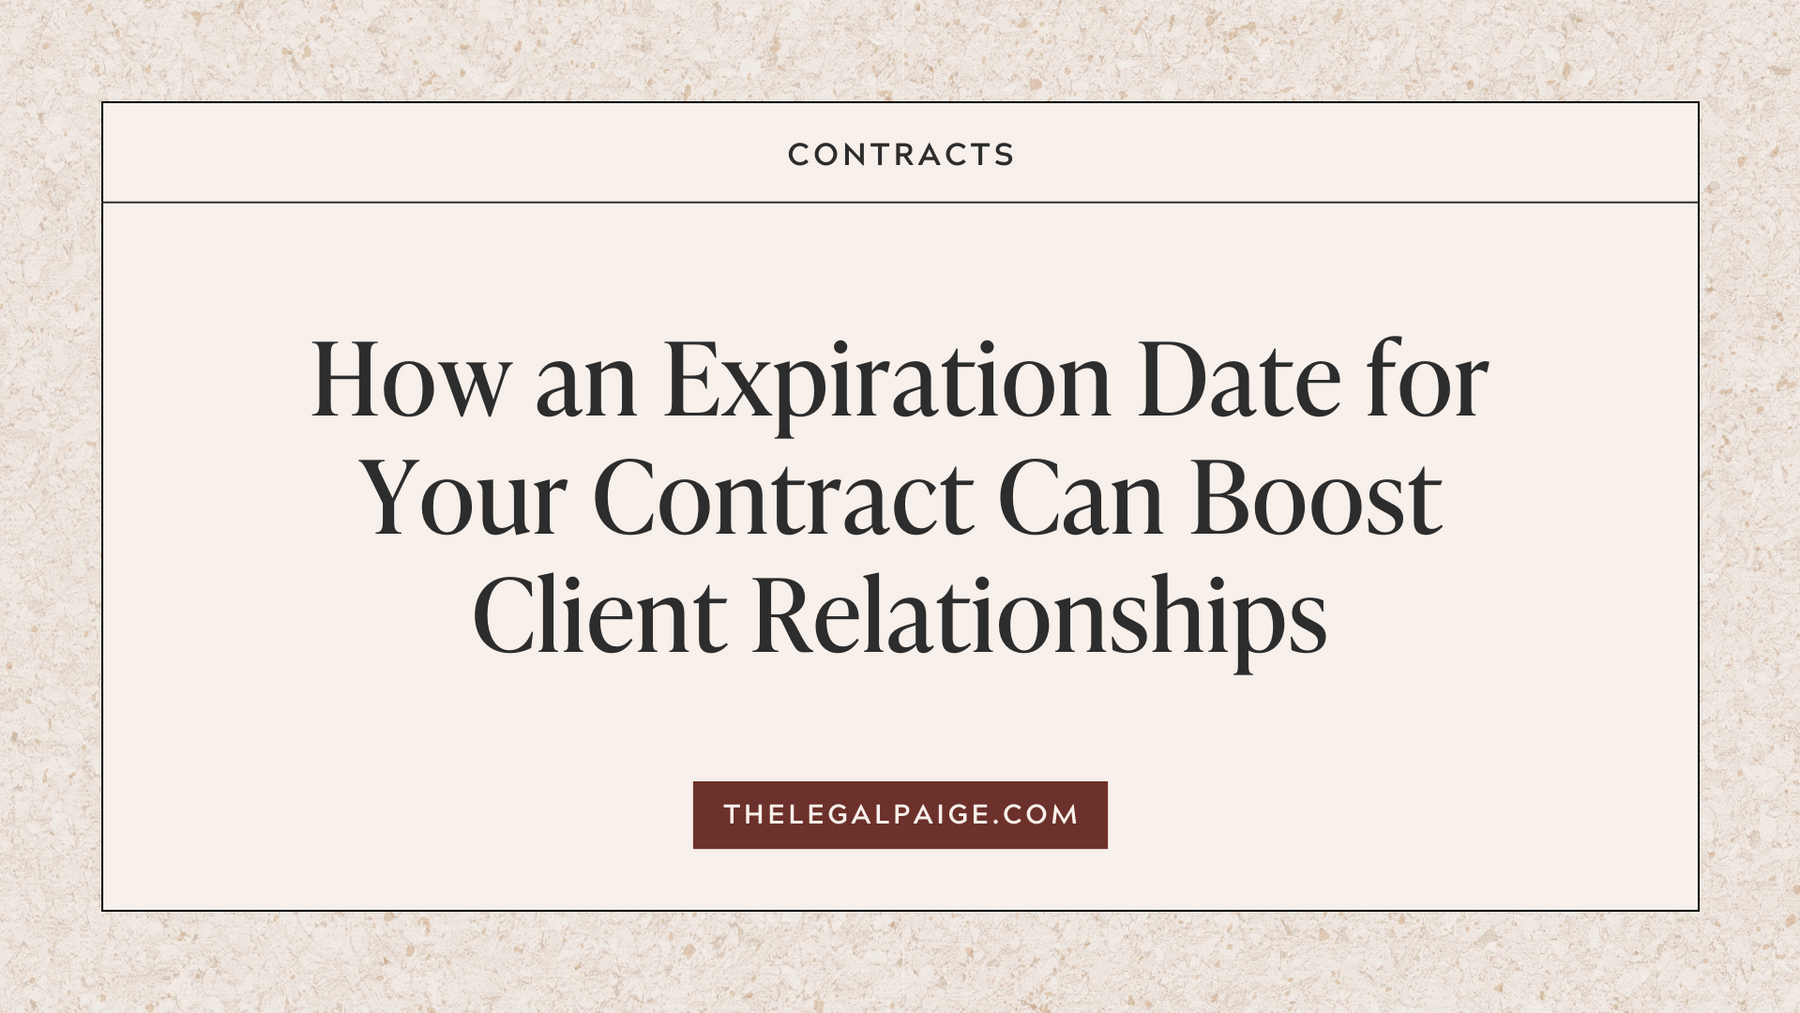 How an Expiration Date for Your Contract Can Boost Client Relationships